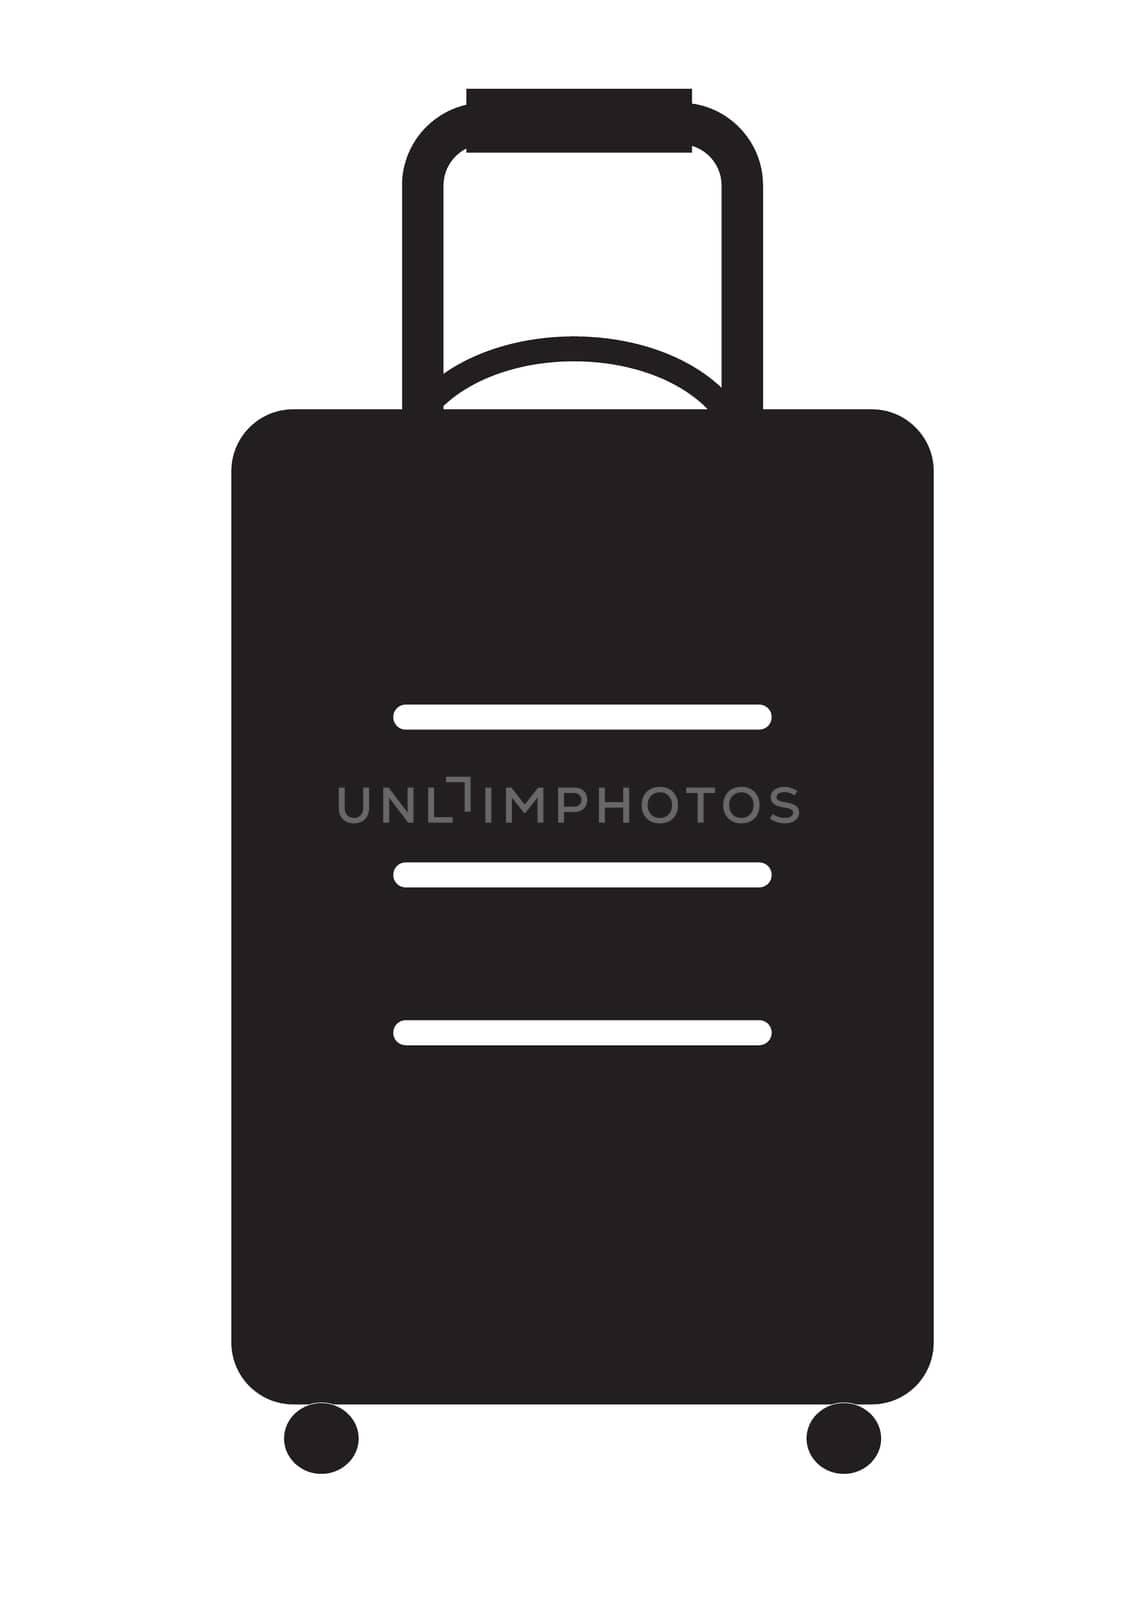 travel bag icon on white background. flat style design. travel b by suthee